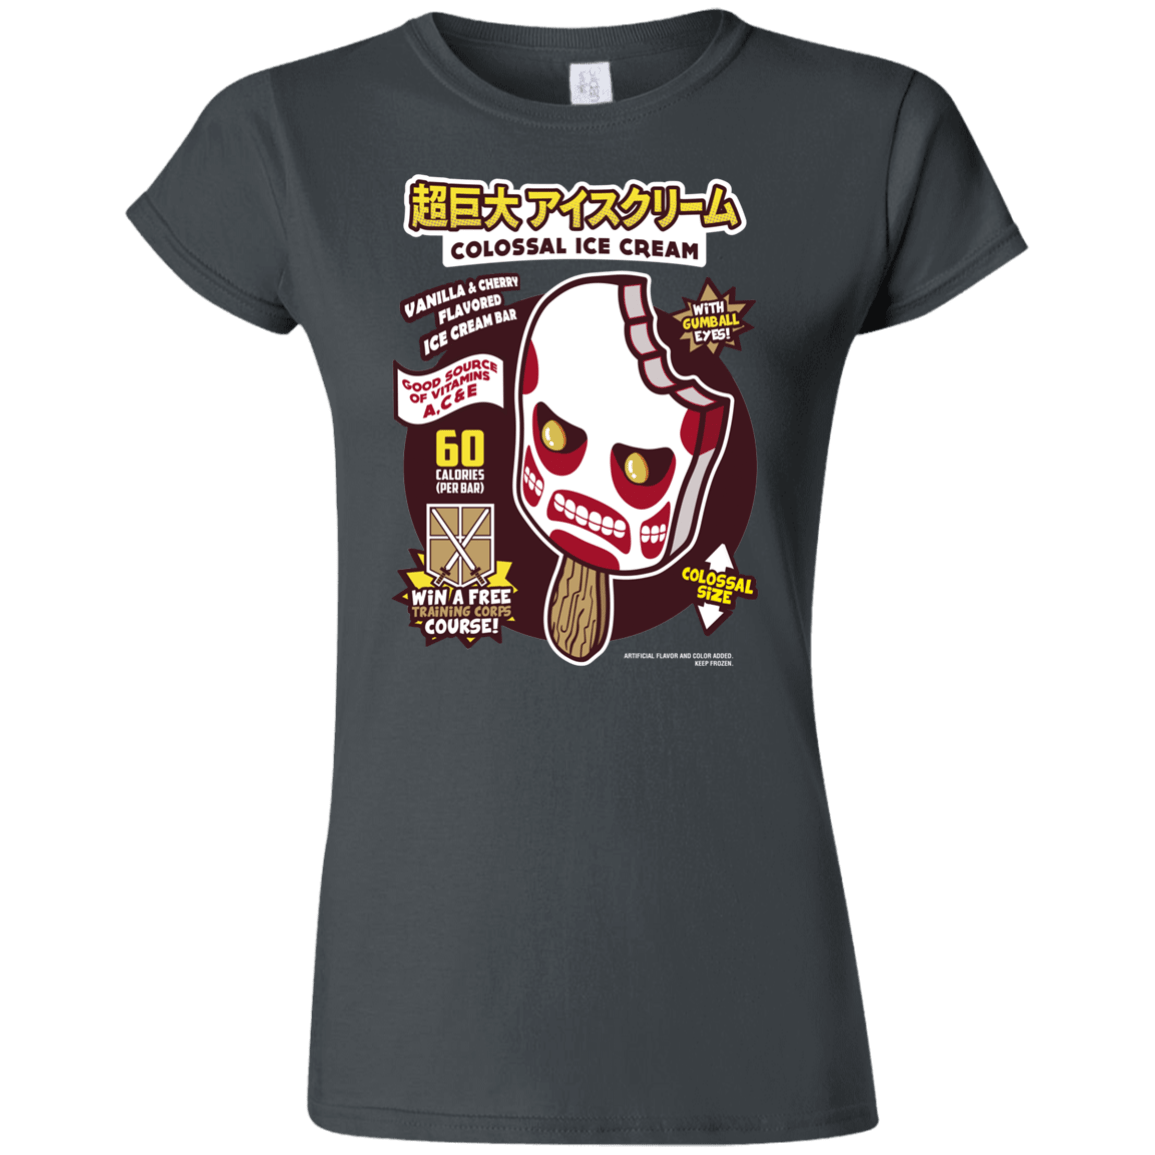 Colossal Ice Cream Junior Slimmer-Fit T-Shirt